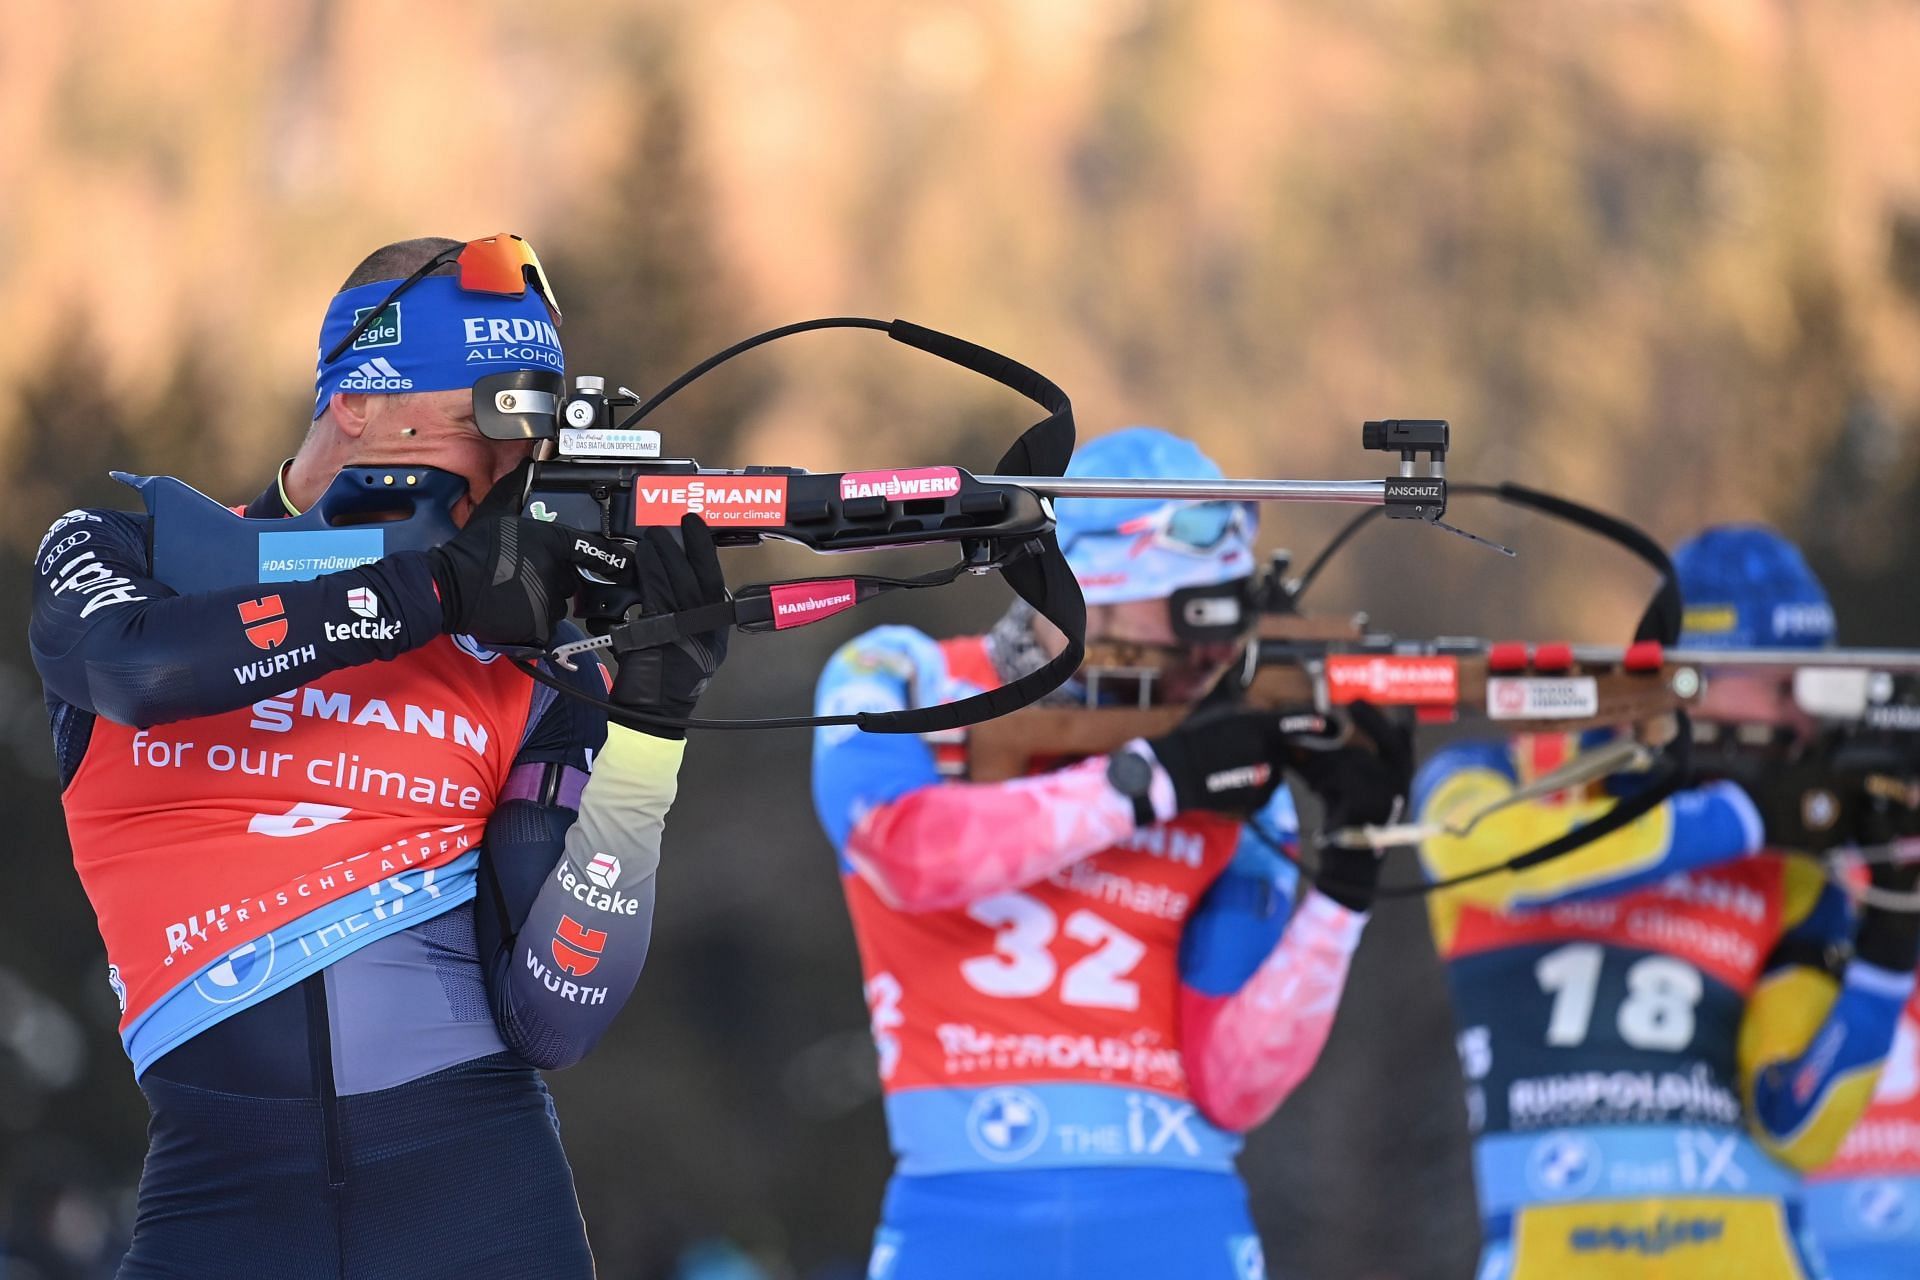 Olympic biathlon events Dates, locations, stadiums & more